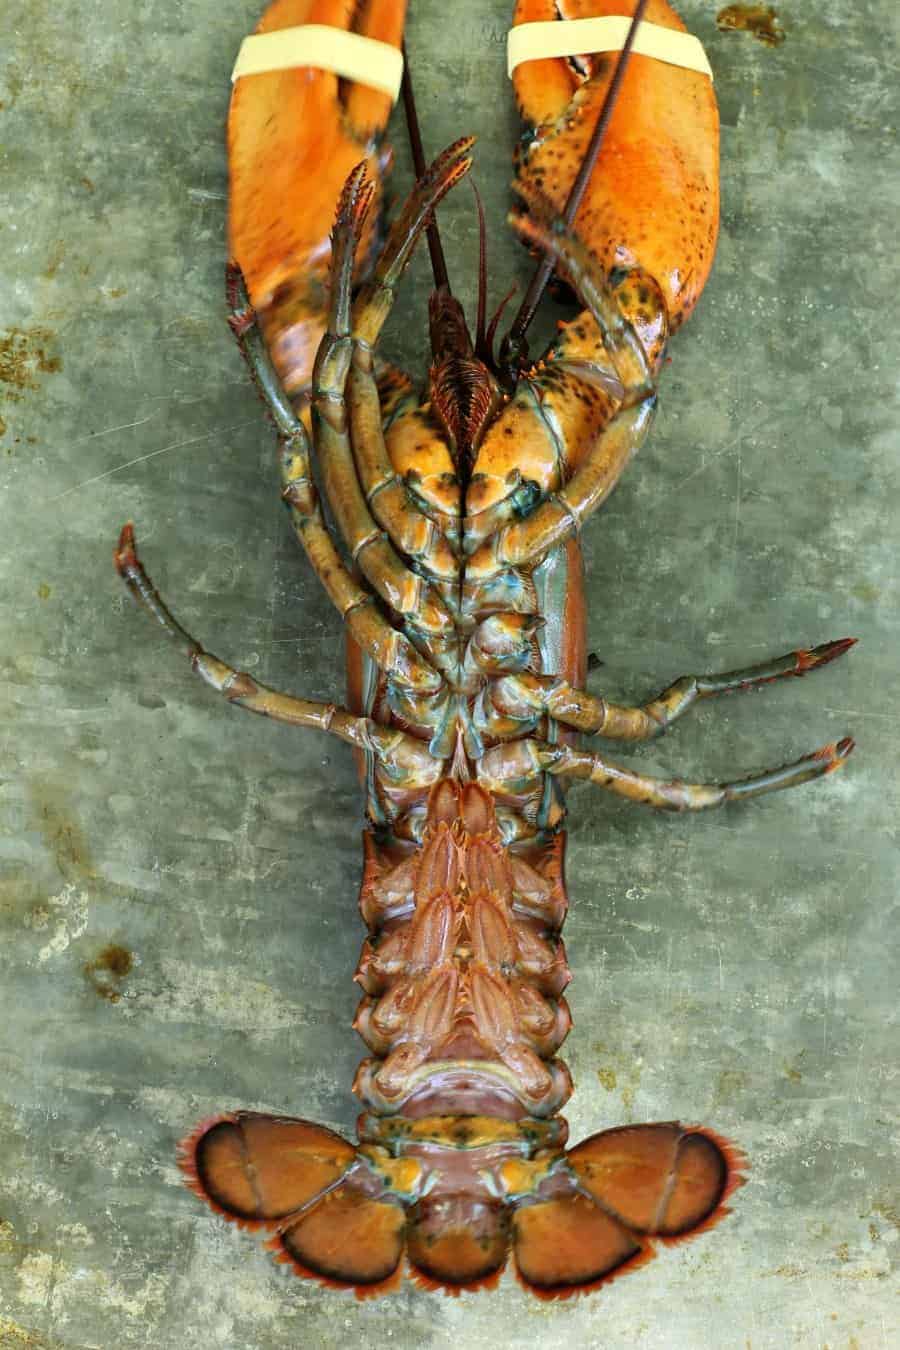 a male lobster on its back for easy identification